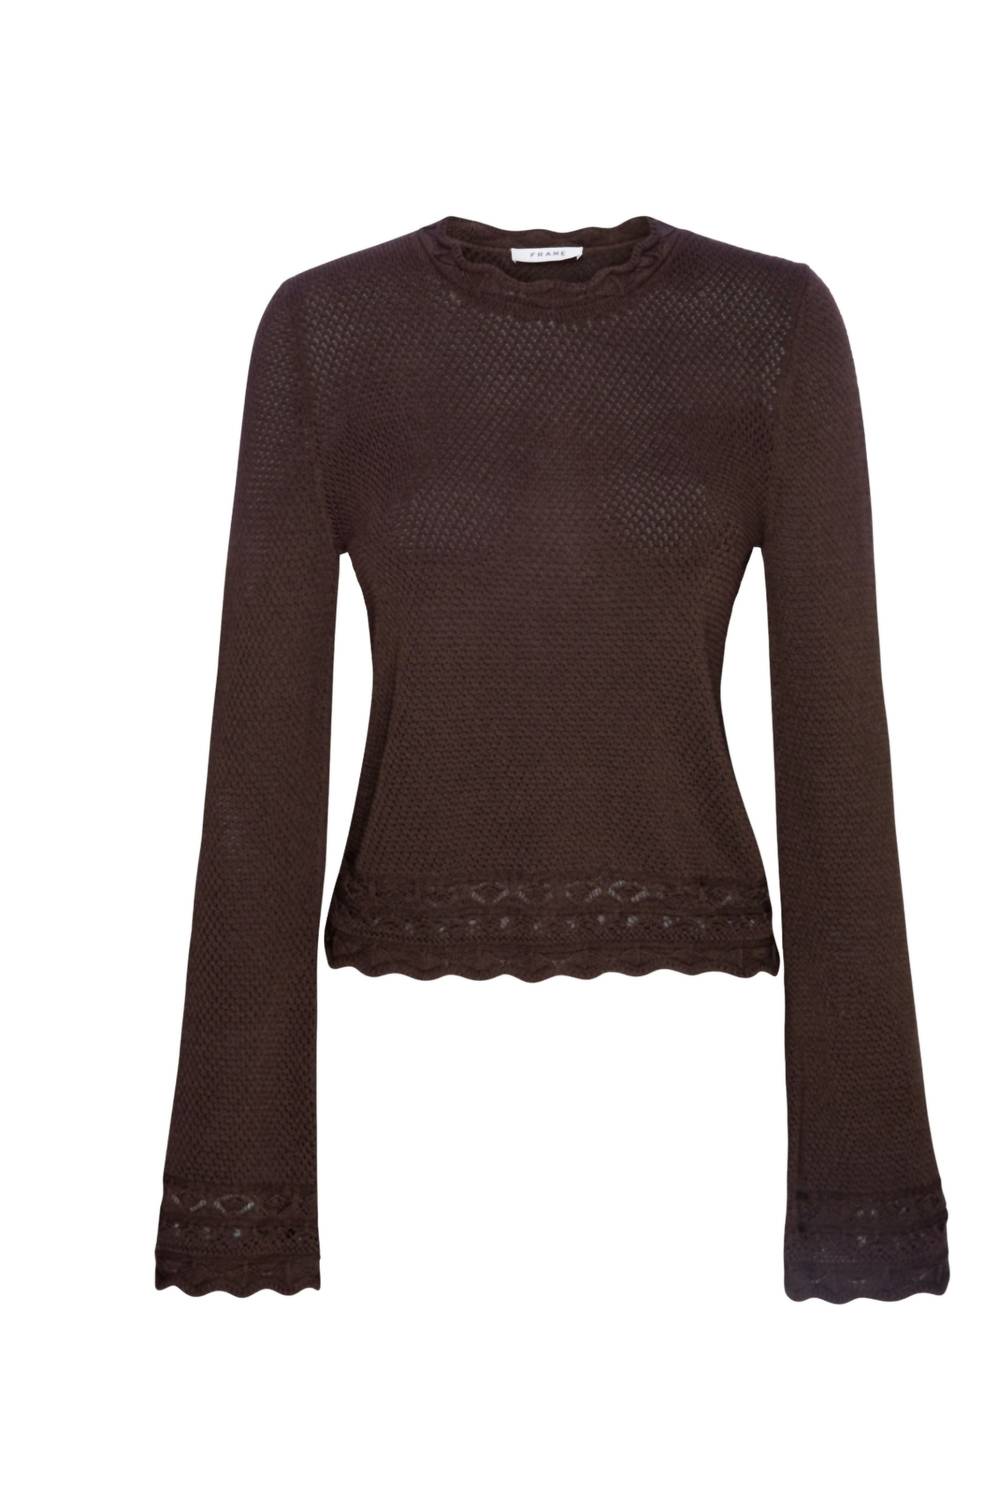 Frame Pointelle Bell Sleeve Sweater In Chocolate In Gold